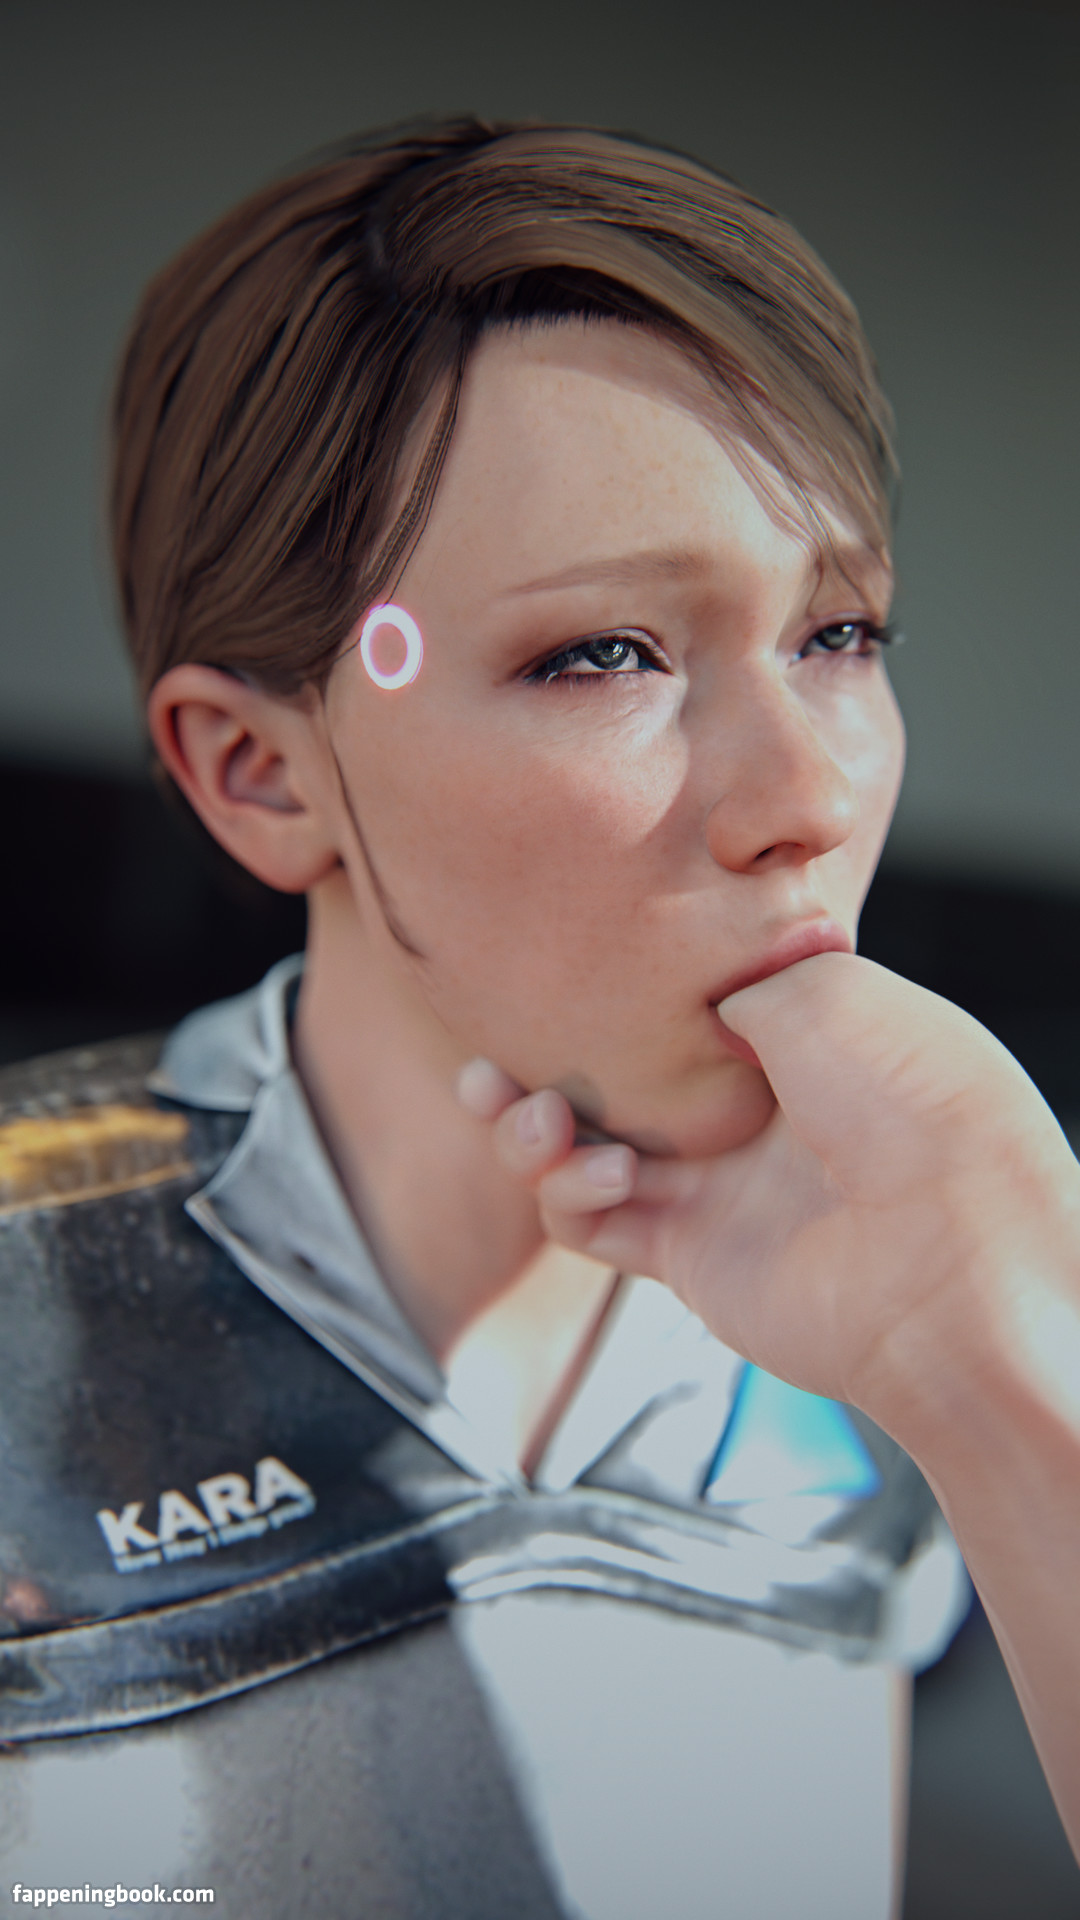 Detroit: Become Human Nude